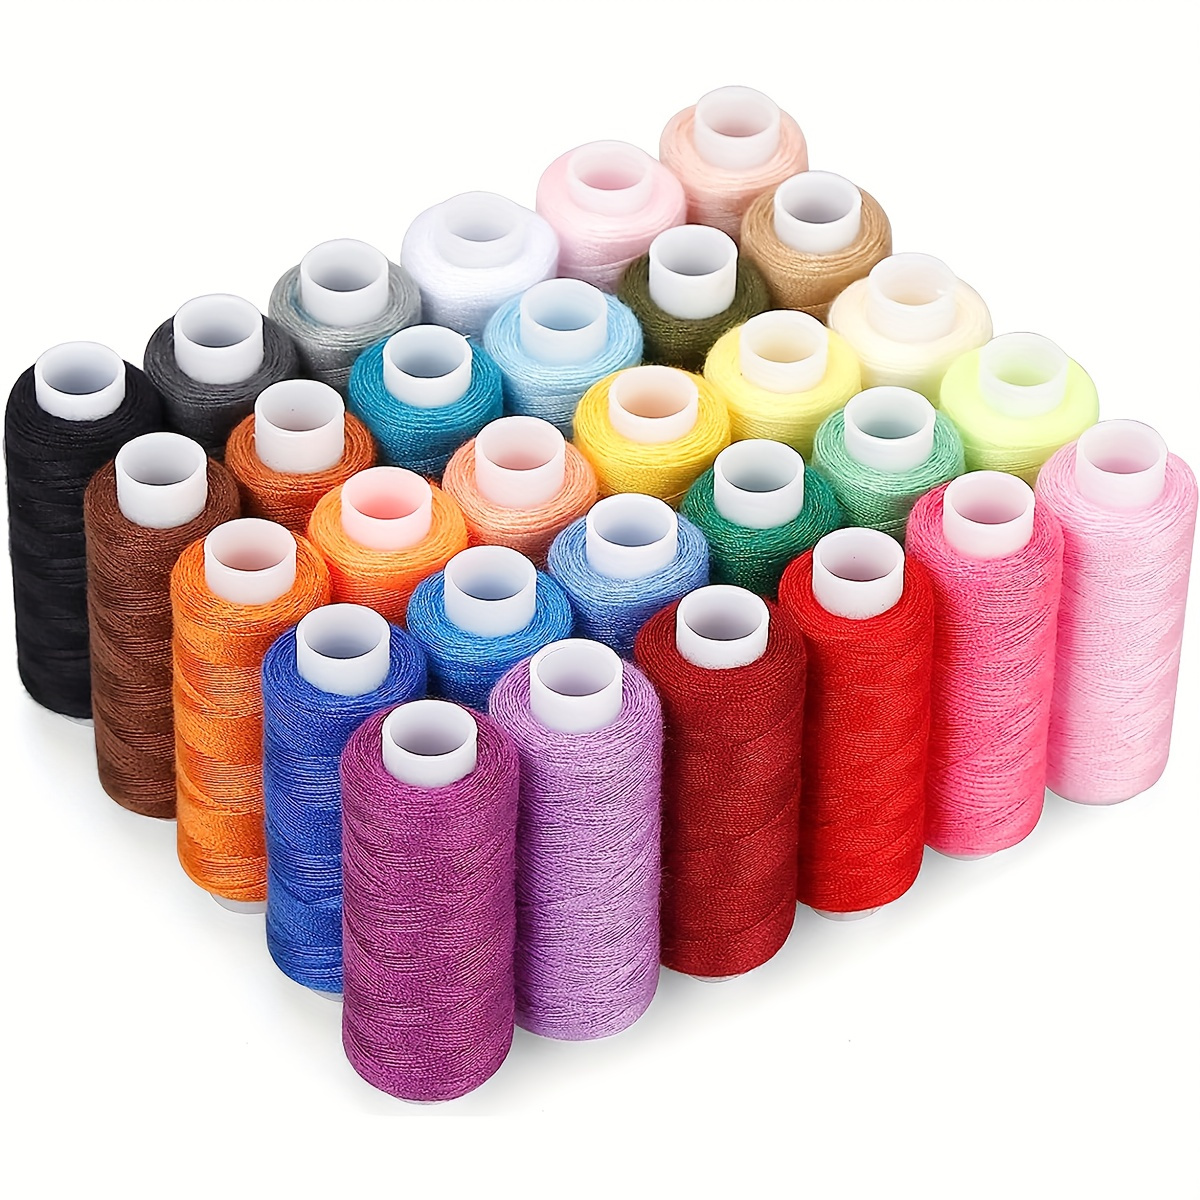 

20-piece Assorted Sewing Thread - Multicolor Embroidery & Hand Stitching Threads For Diy Clothing And Crafts, Ideal For Beginners And Enthusiasts